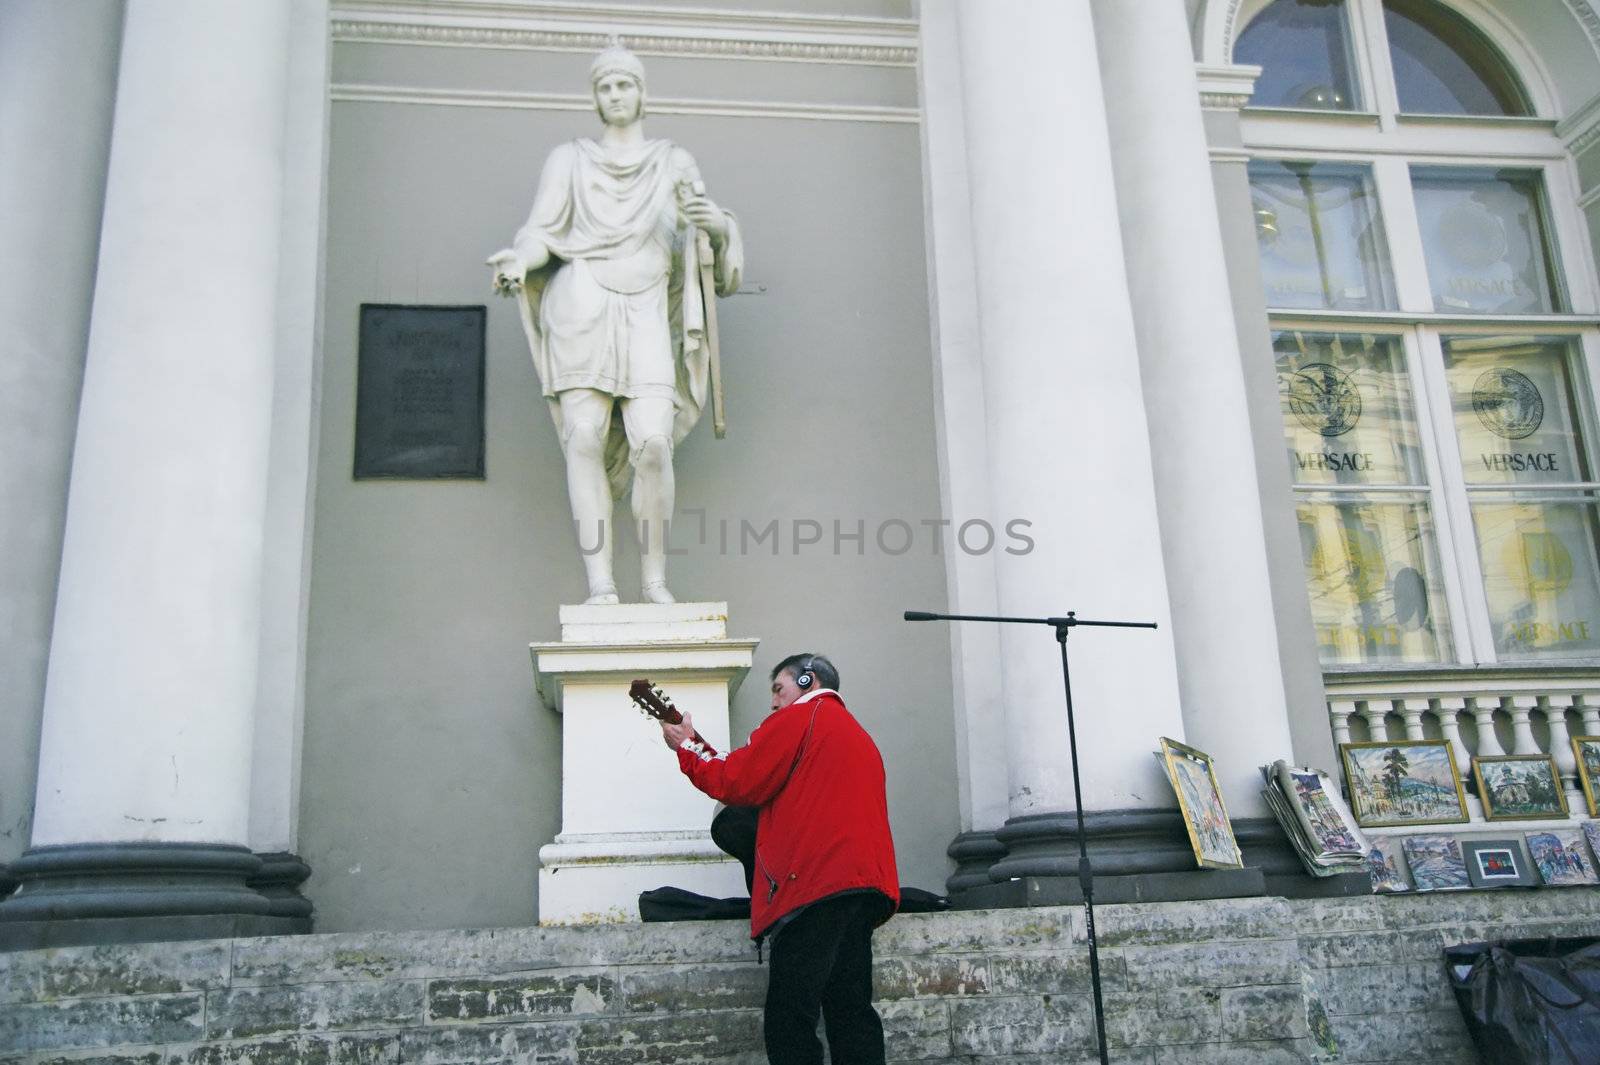 ST PETERSBURG, RUSSIA-MARCH 31, 2008: Street musician playing guitar by sidewalk in front of antique building in Saint Petersburg, Russia